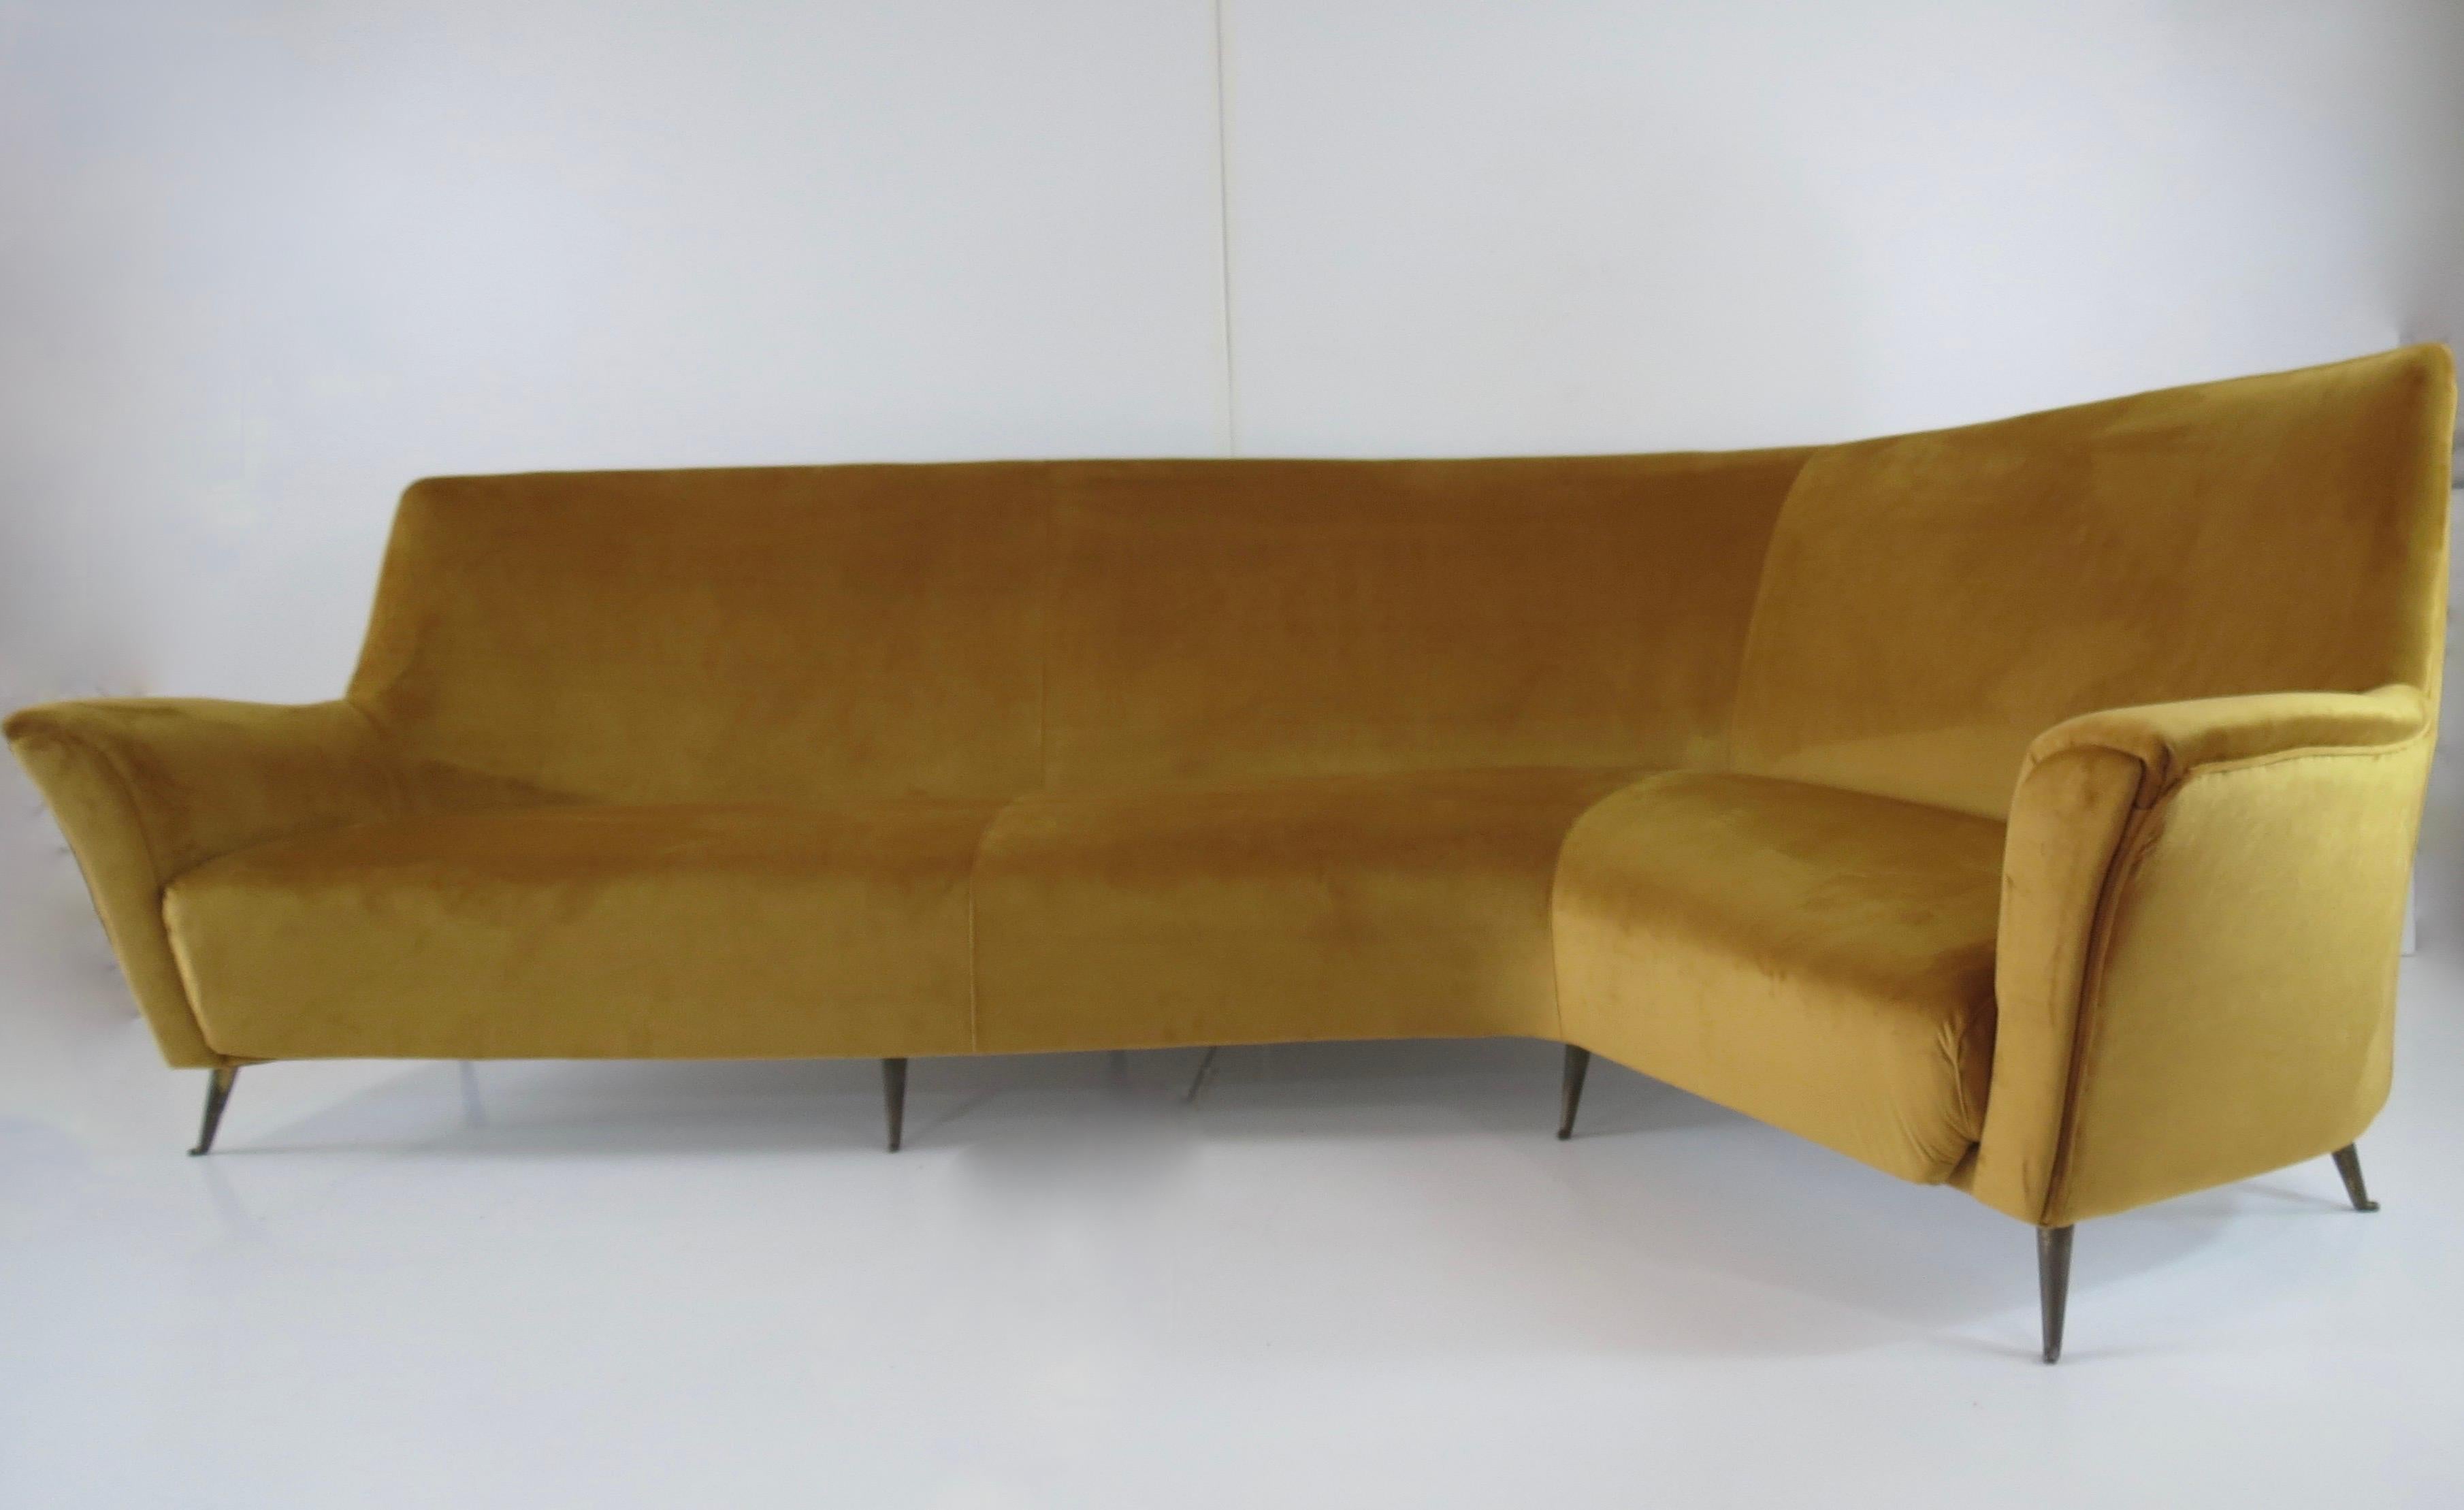 Important and extremely rare Ico & Luisa Parisi curved sofa produced by Isa Bergamo, circa 1952
Brass feet and reupholstery in yellow gold mustard velvet
Measures: H 87 cm, 274cm x 176 cm height seat 37 cm
Gold velvet reupholstery
Eight brass